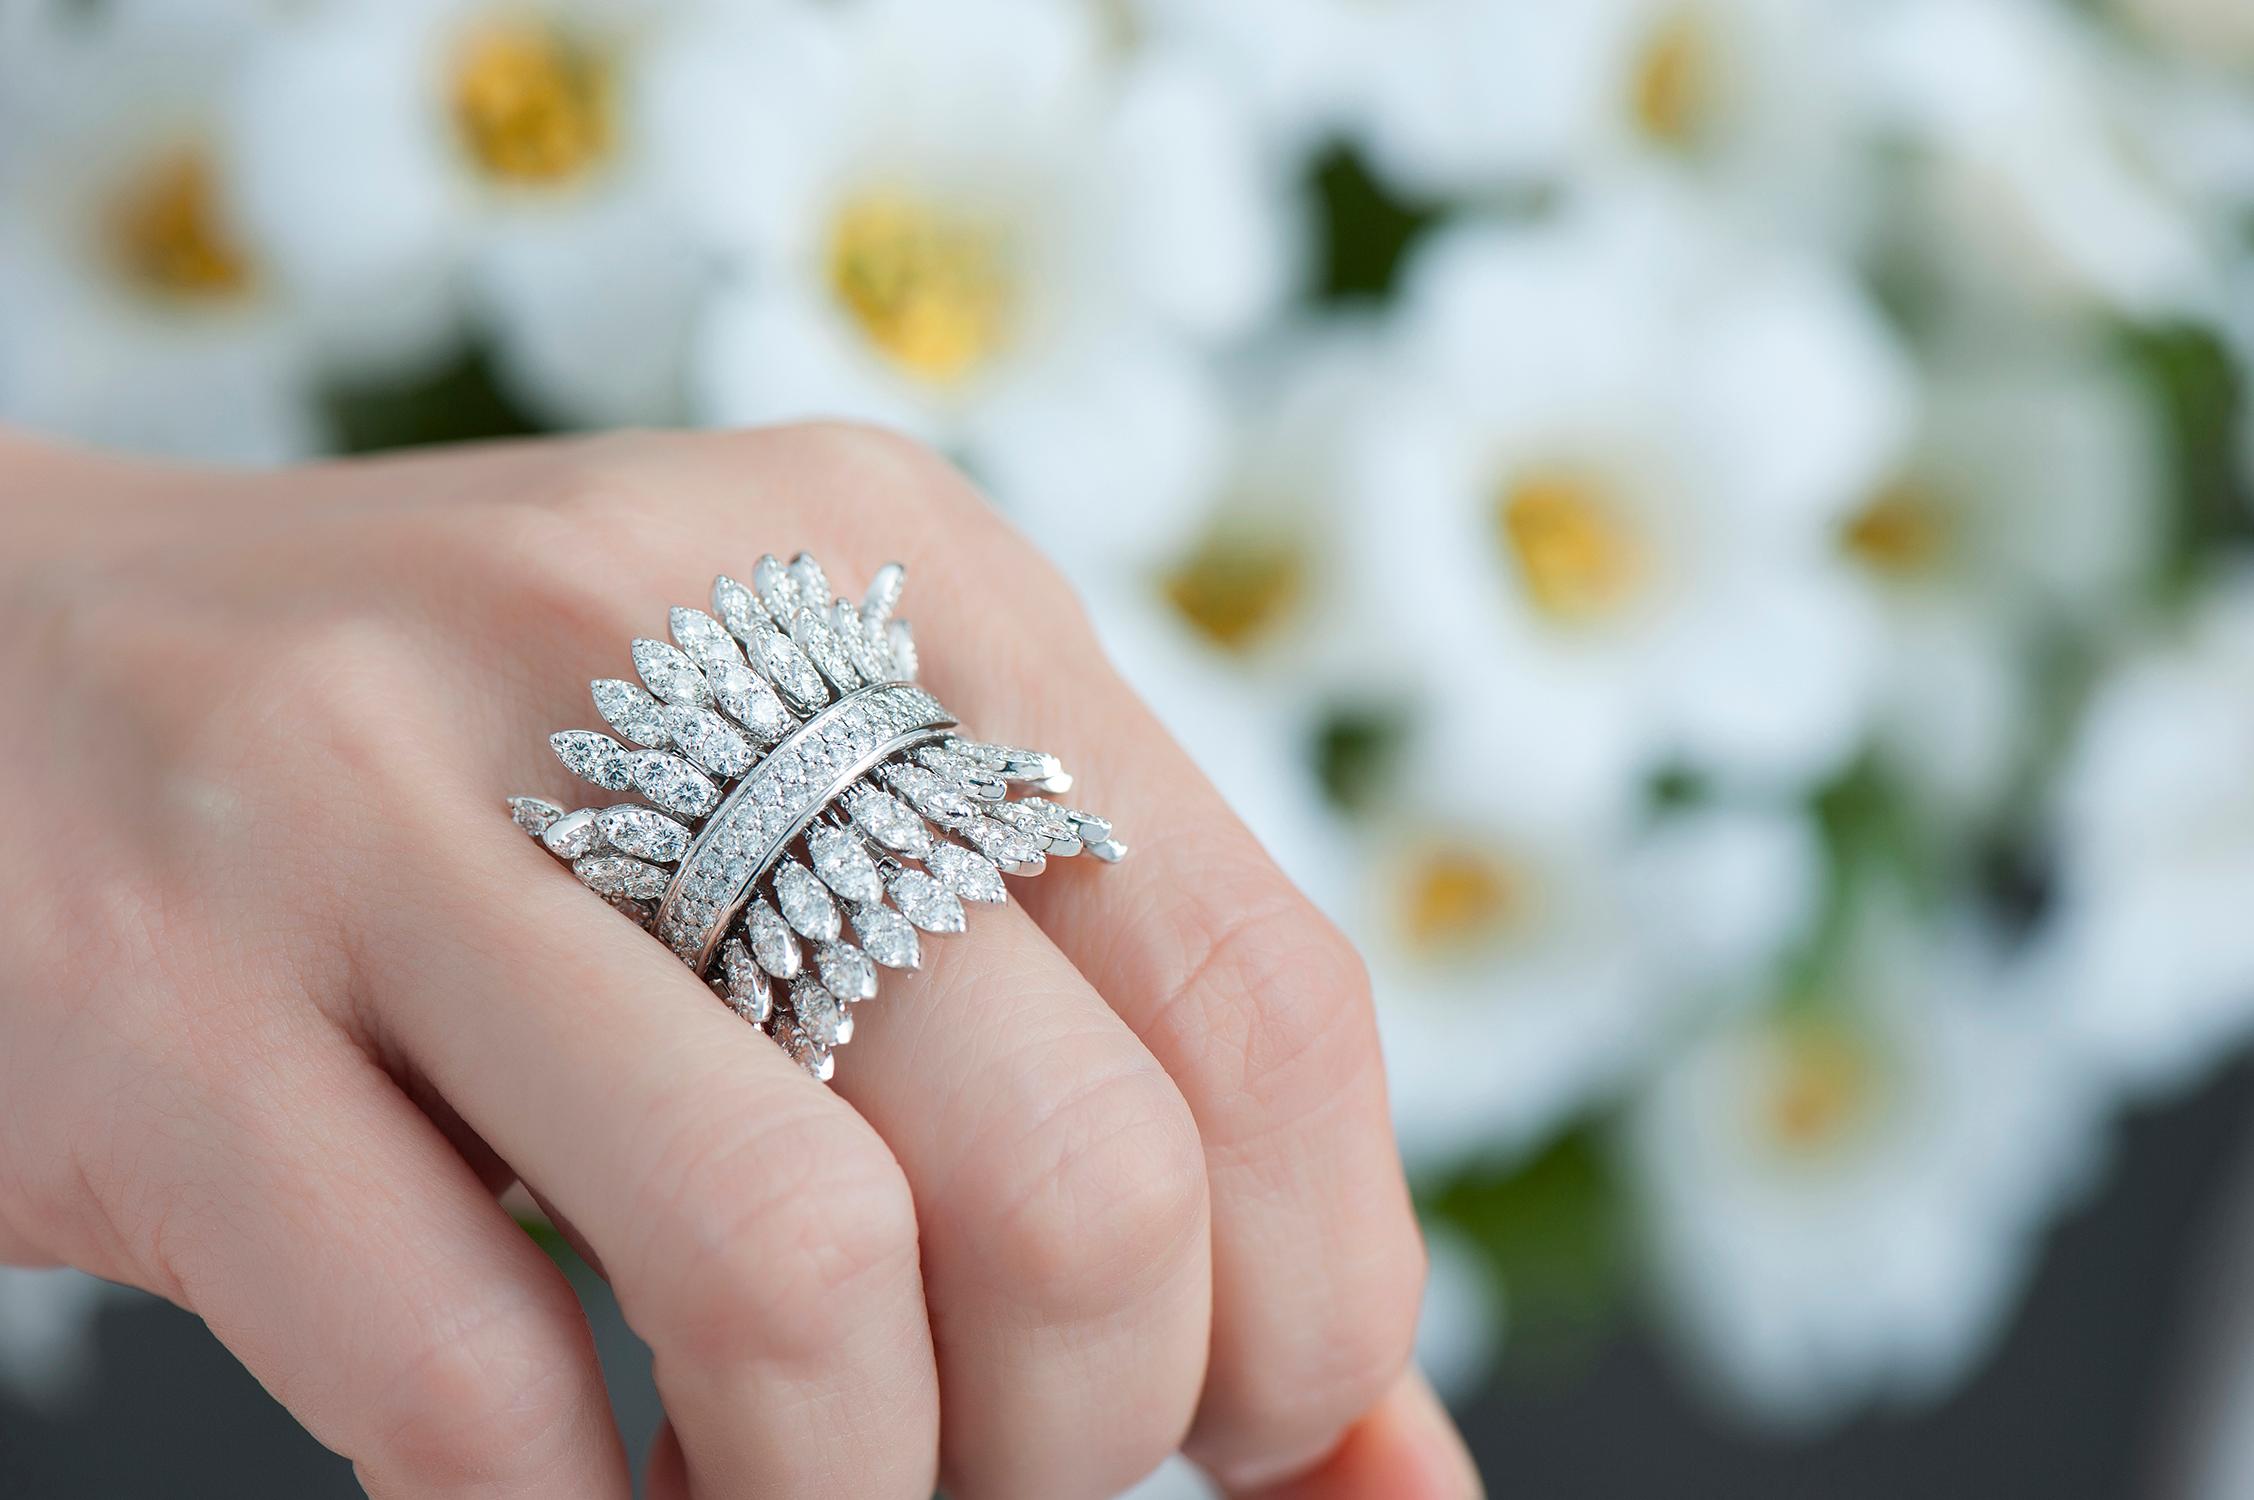 18K White Gold Spettinato Ring with White Diamonds.
Petals are kinetic with movement.
Gold Weight: 16.15 grams
Diamond Carats: 4.23

FerrariFirenze, Handmade in Italy.
US Ring Size: 7
Style: FF046RG21

18k White Gold Cocktail Diamond Ring, ideal for